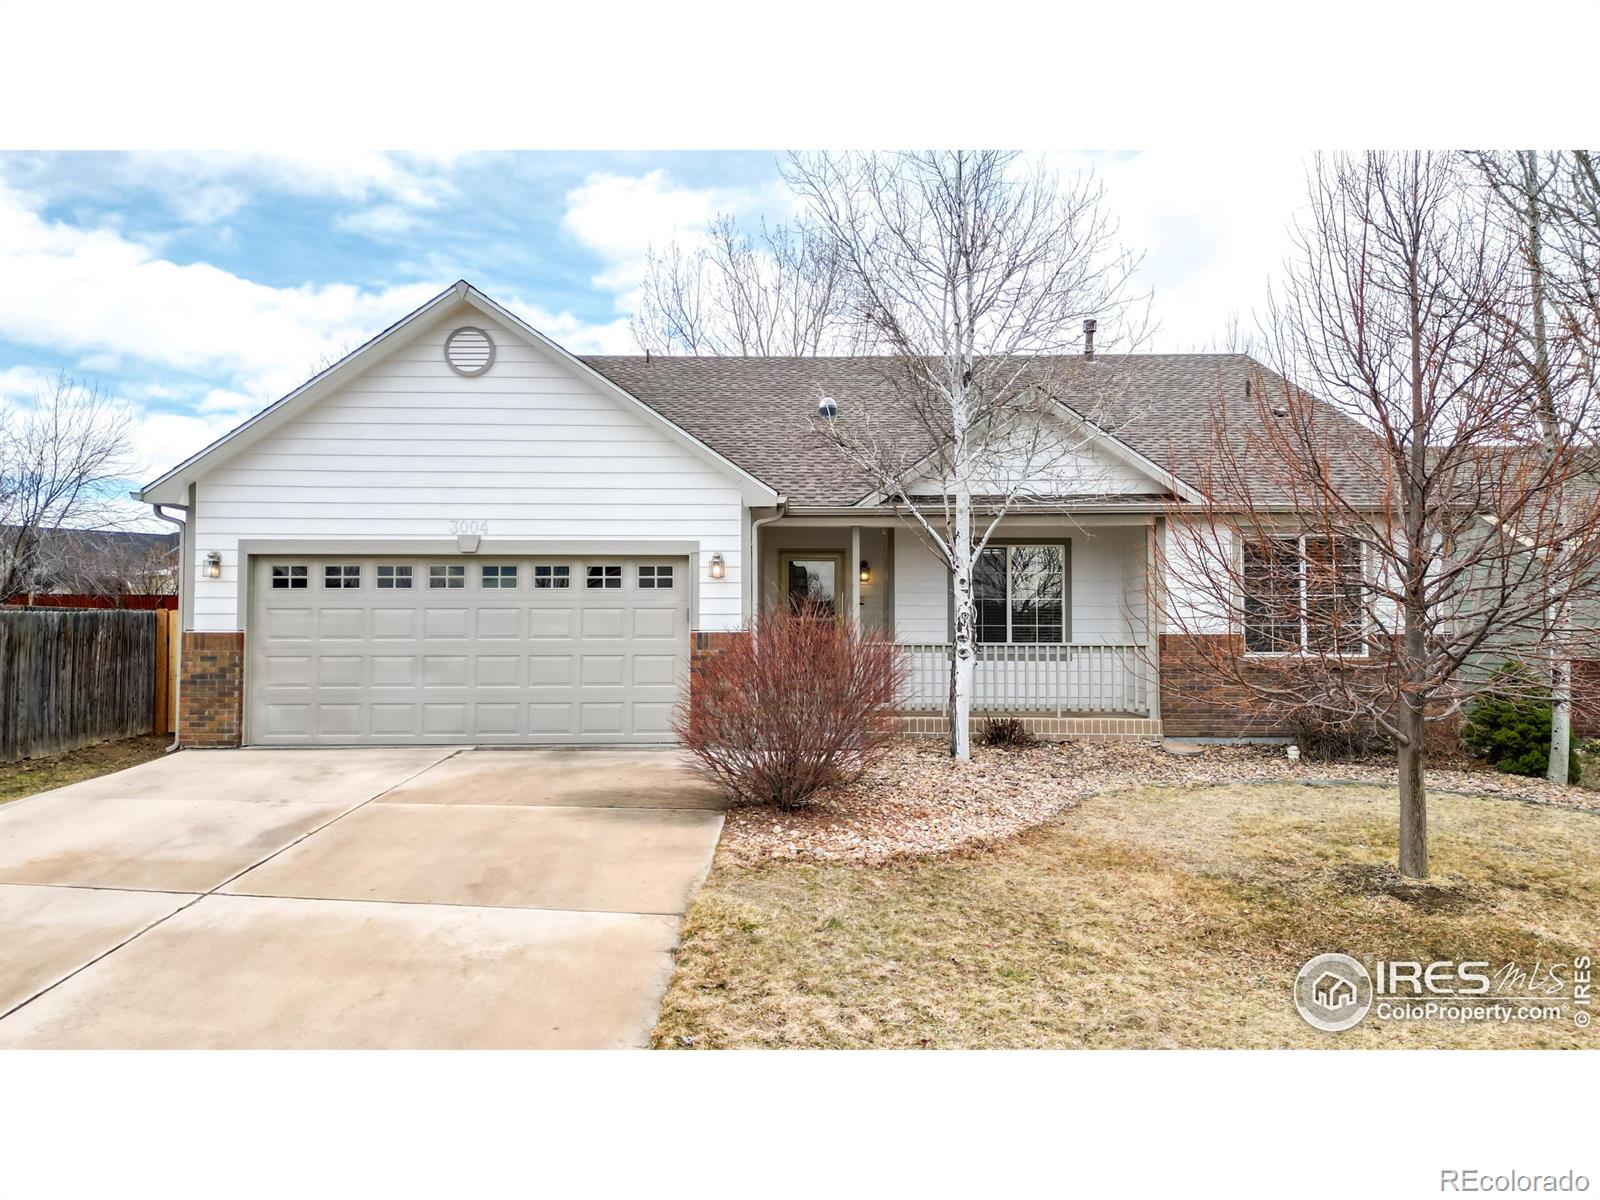 3004  41st Avenue, greeley MLS: 4567891004983 Beds: 4 Baths: 3 Price: $464,900